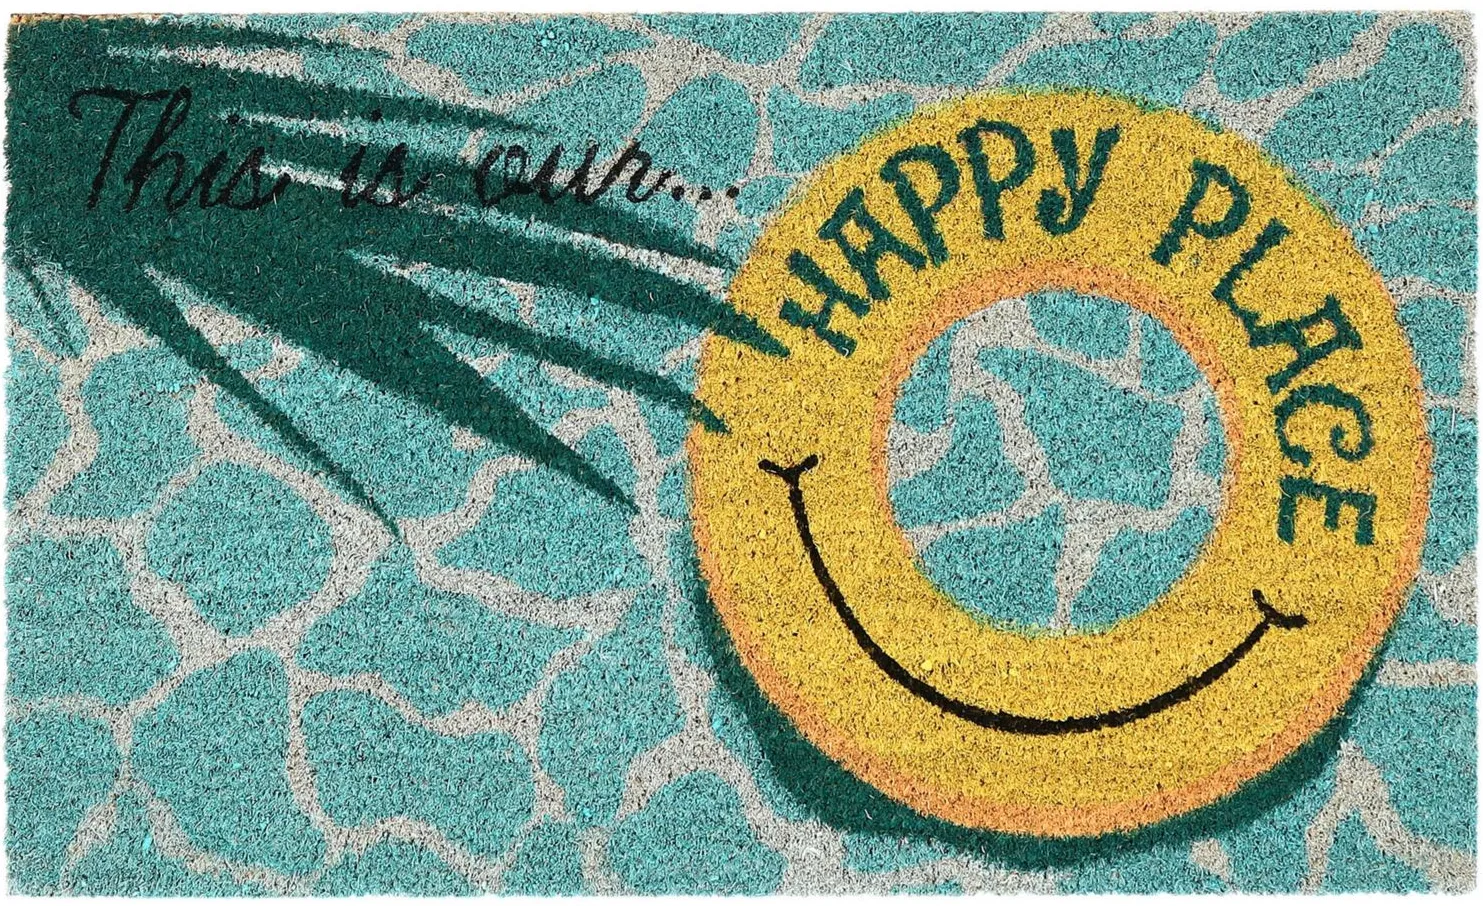 Liora Manne Natura This Is Our Happy Place Outdoor Mat in Aqua by Trans-Ocean Import Co Inc